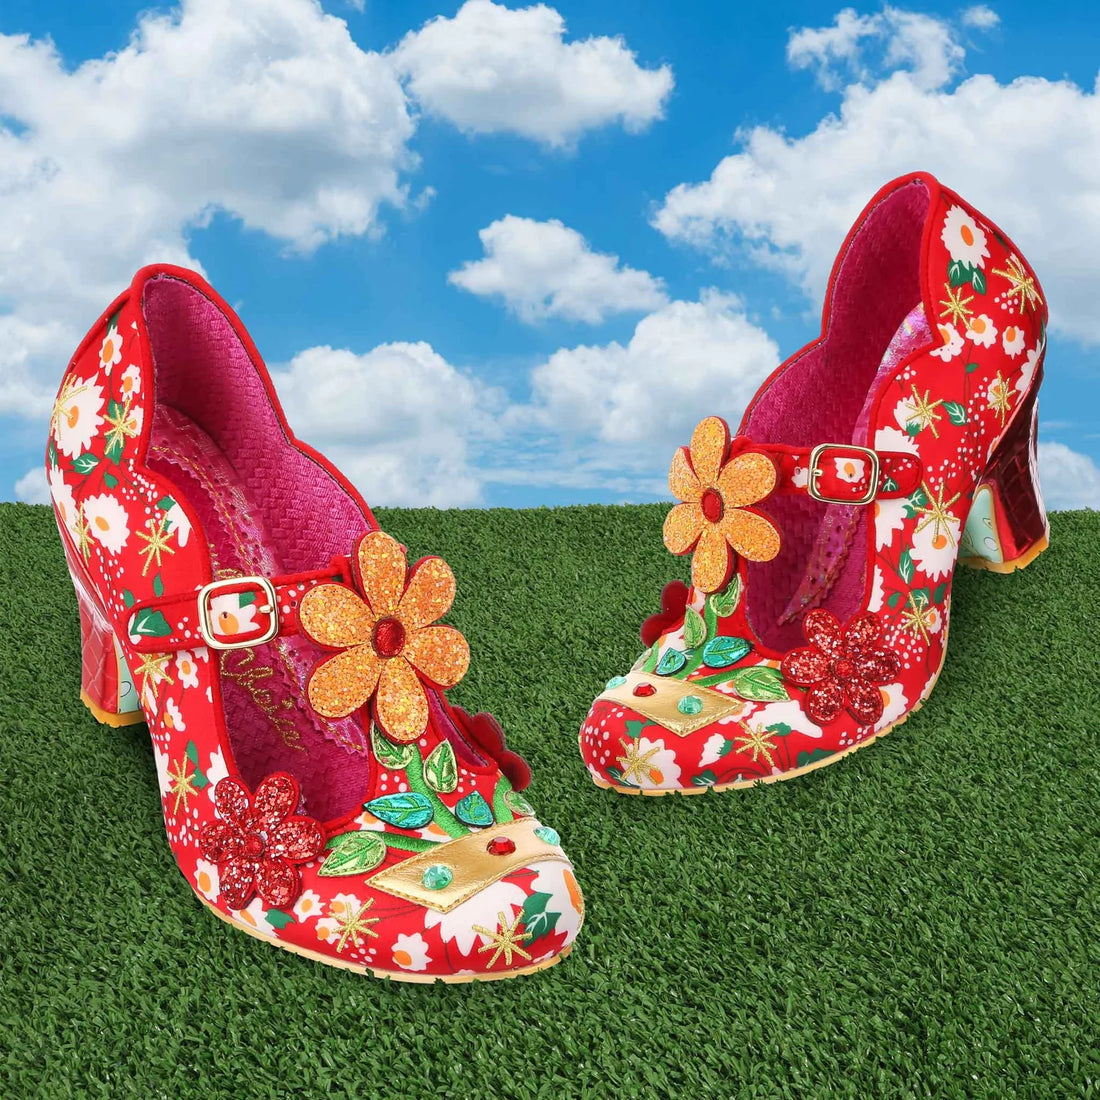 The New Pokemon ♡ Irregular Choice Collection is Here! – JapanLA